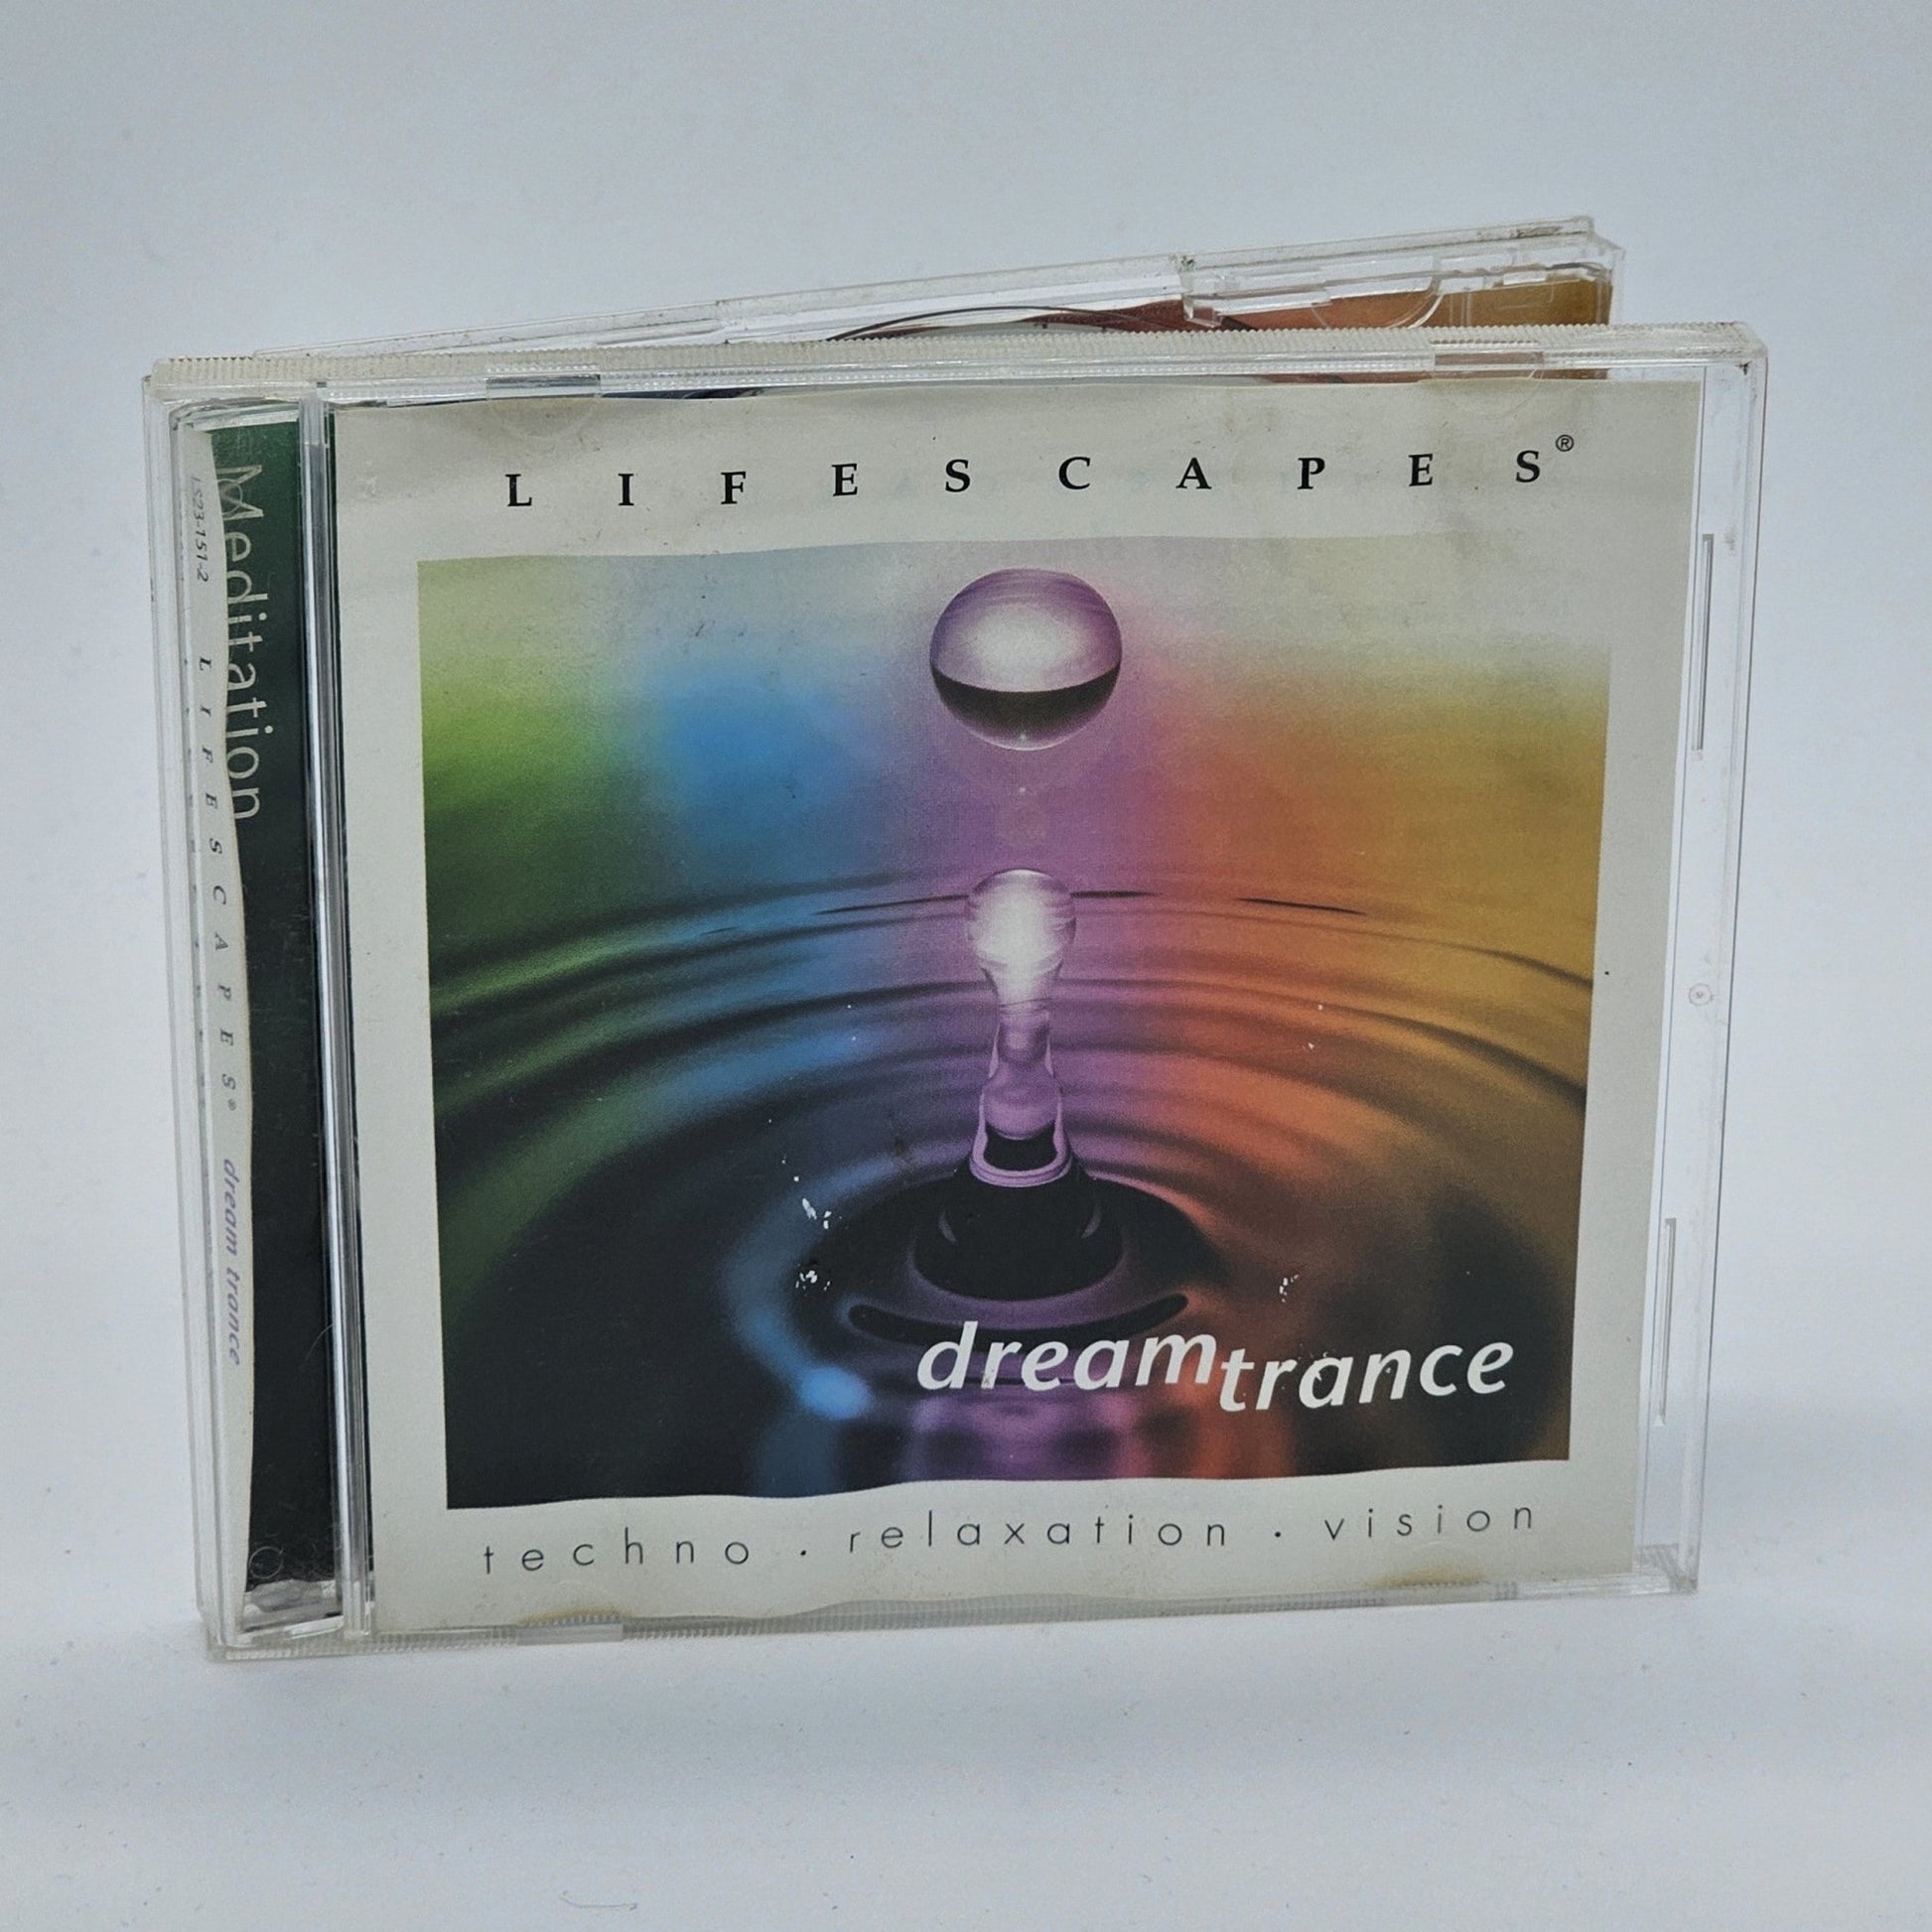 Compass Productions - Tom Hambleton | Lifescapes | Dreamtrance | CD - Compact Disc - Steady Bunny Shop